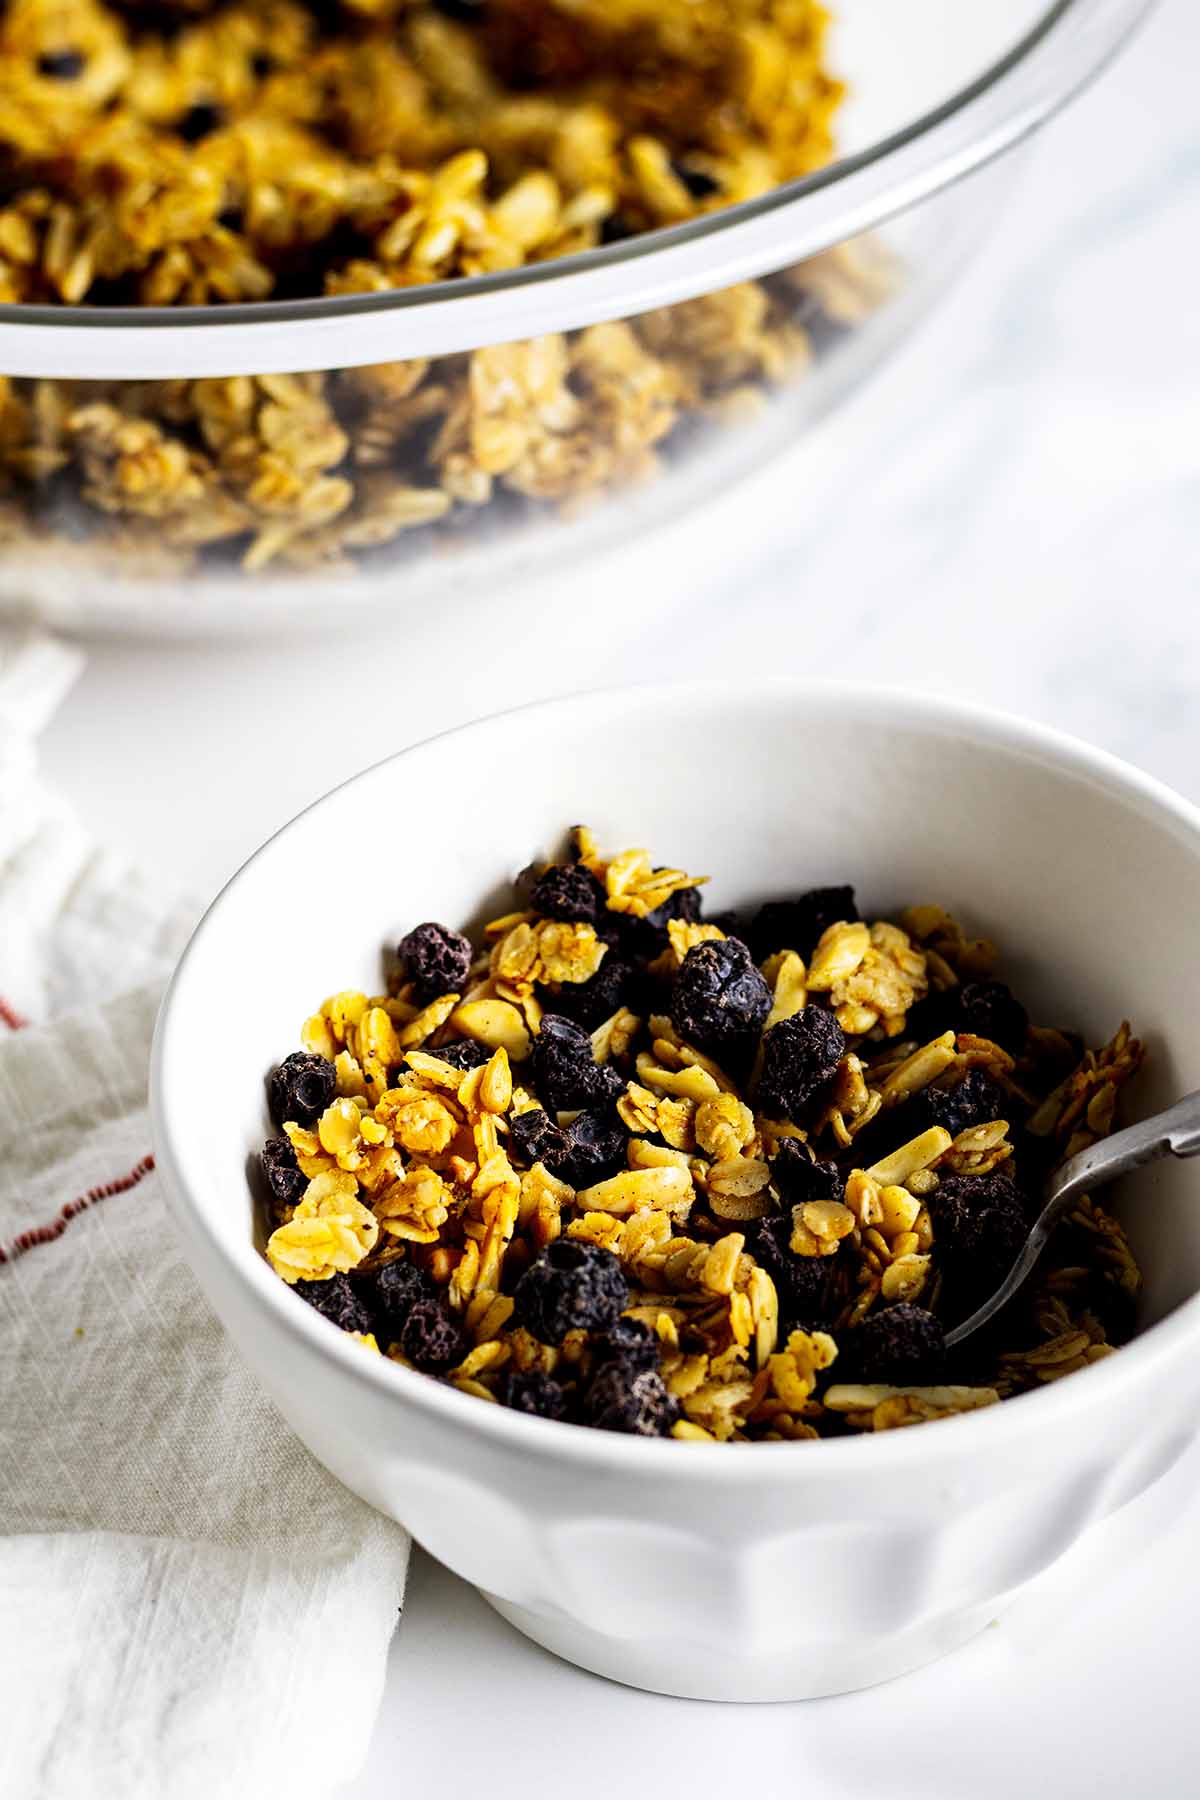 Granola in a white bowl with spoon and white napkin